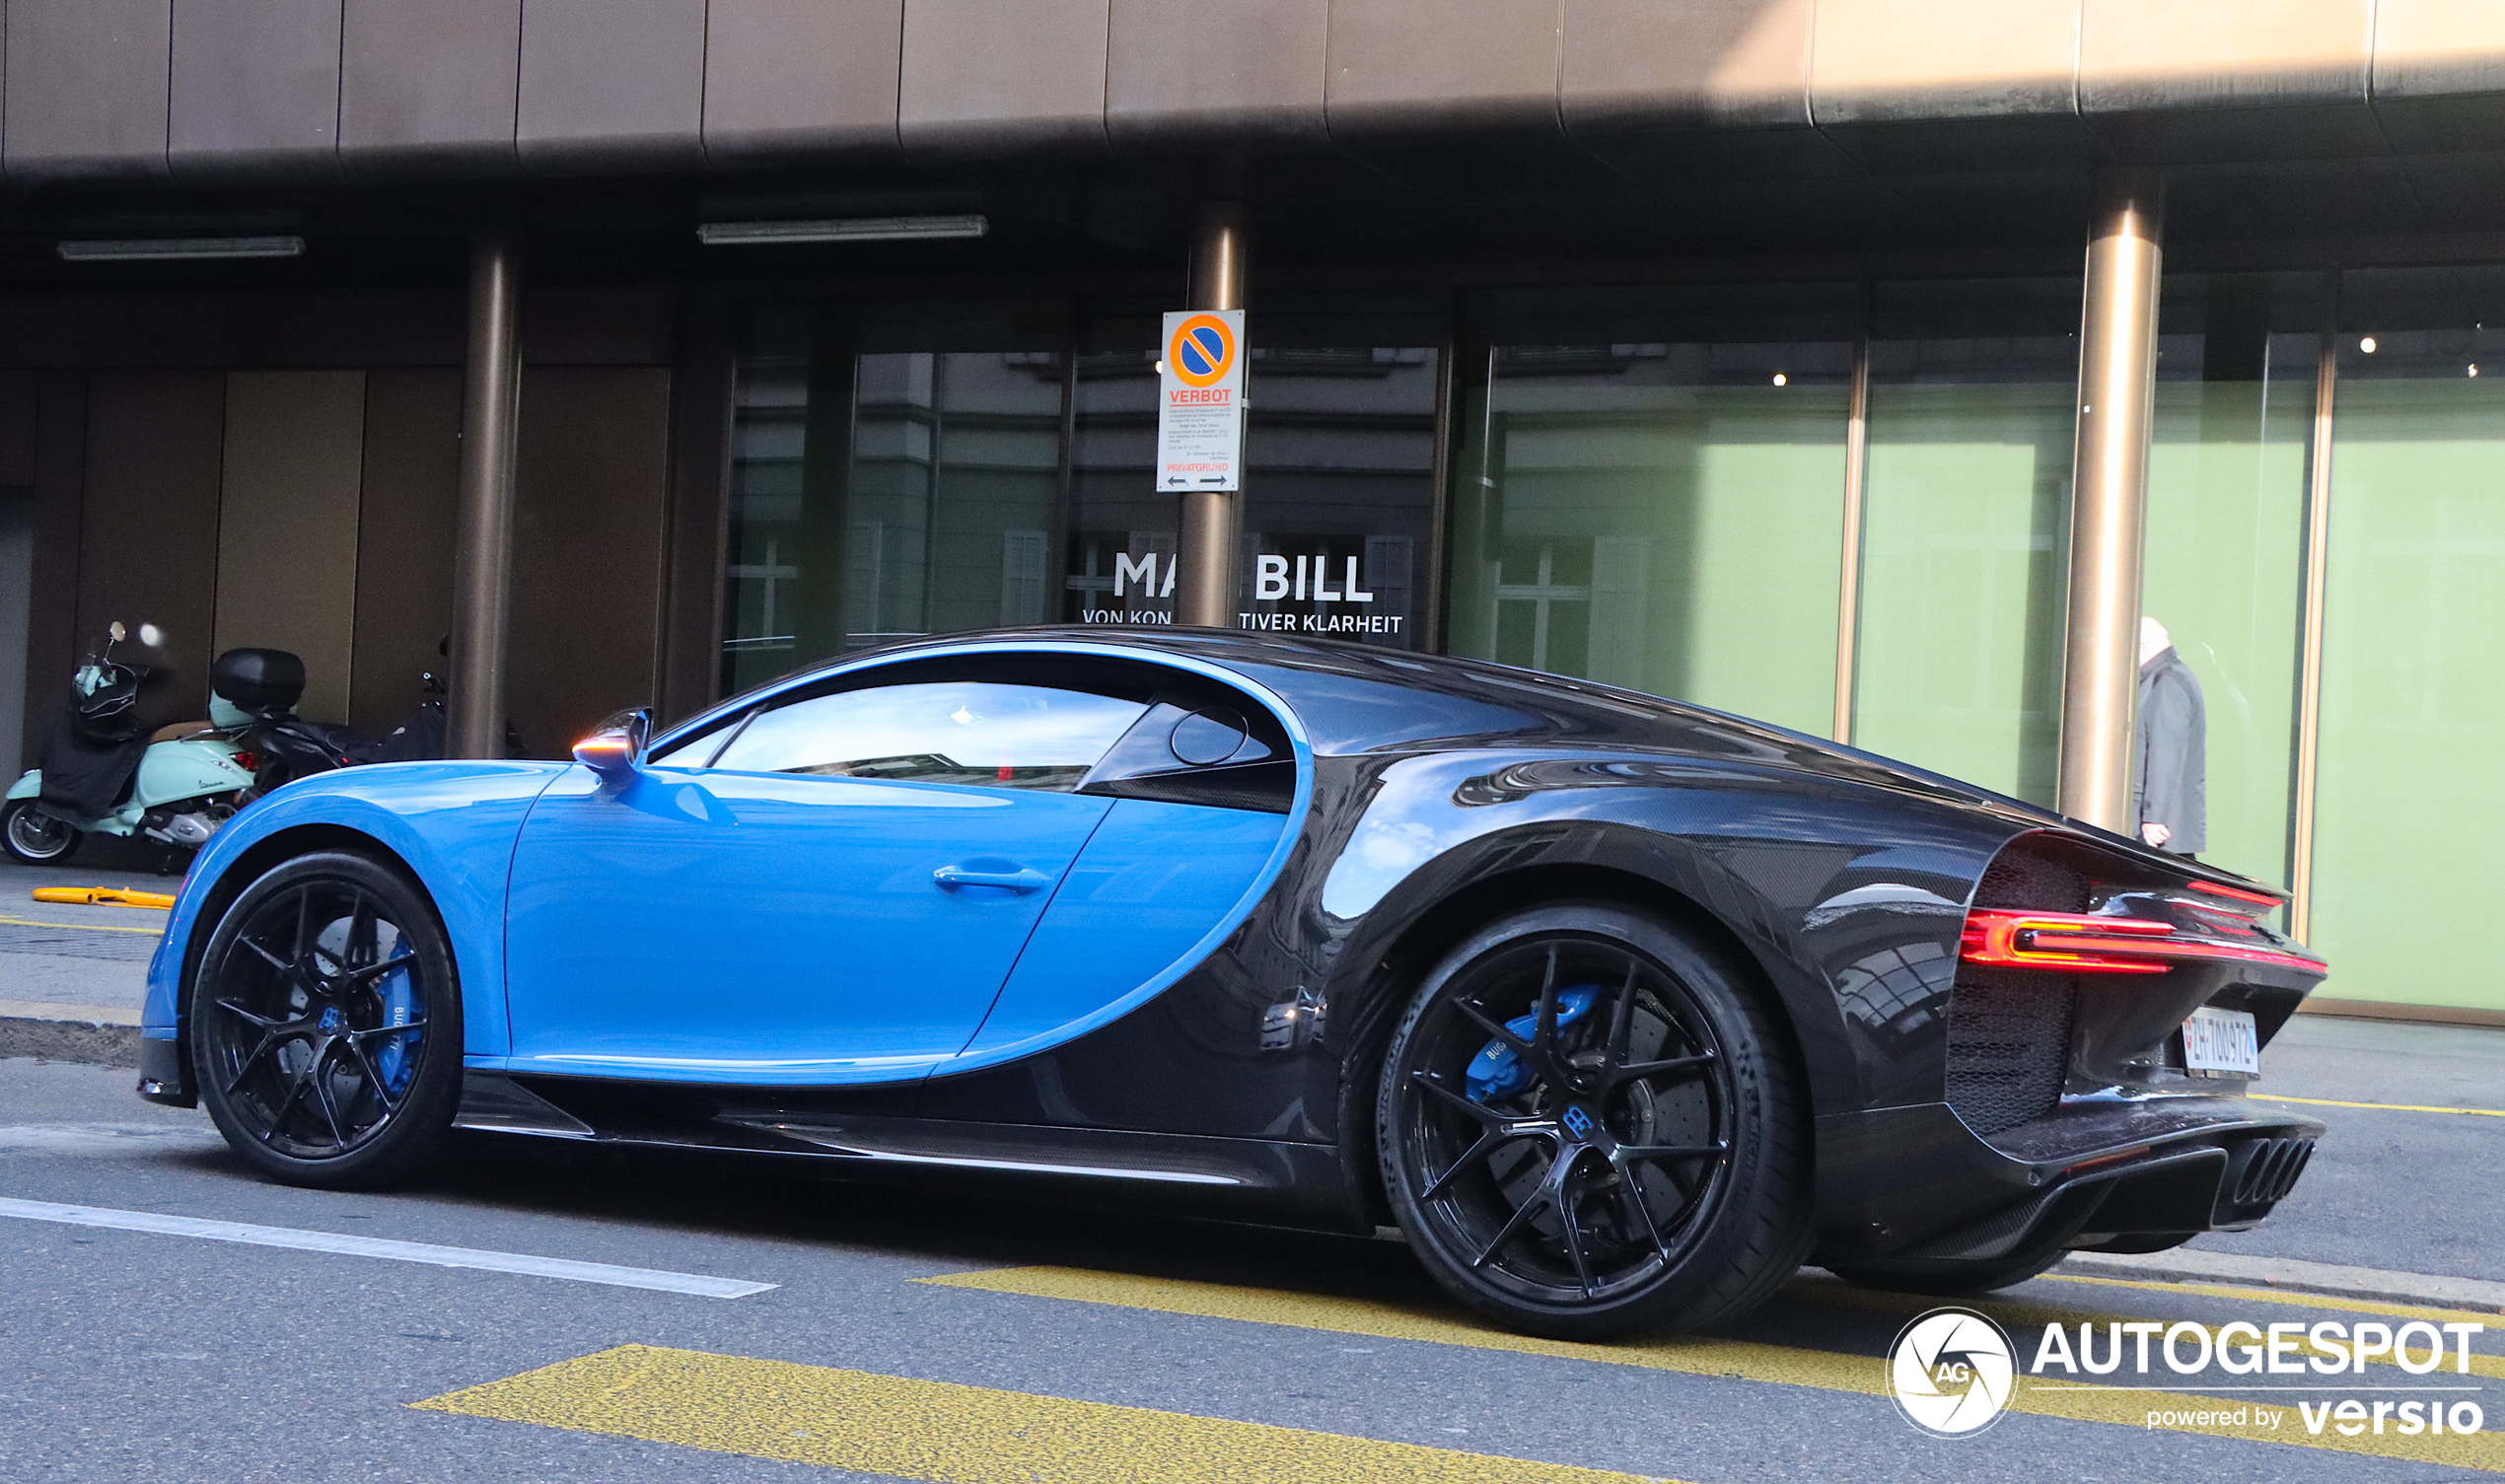 A new Bugatti surfaces in Zurich once again.